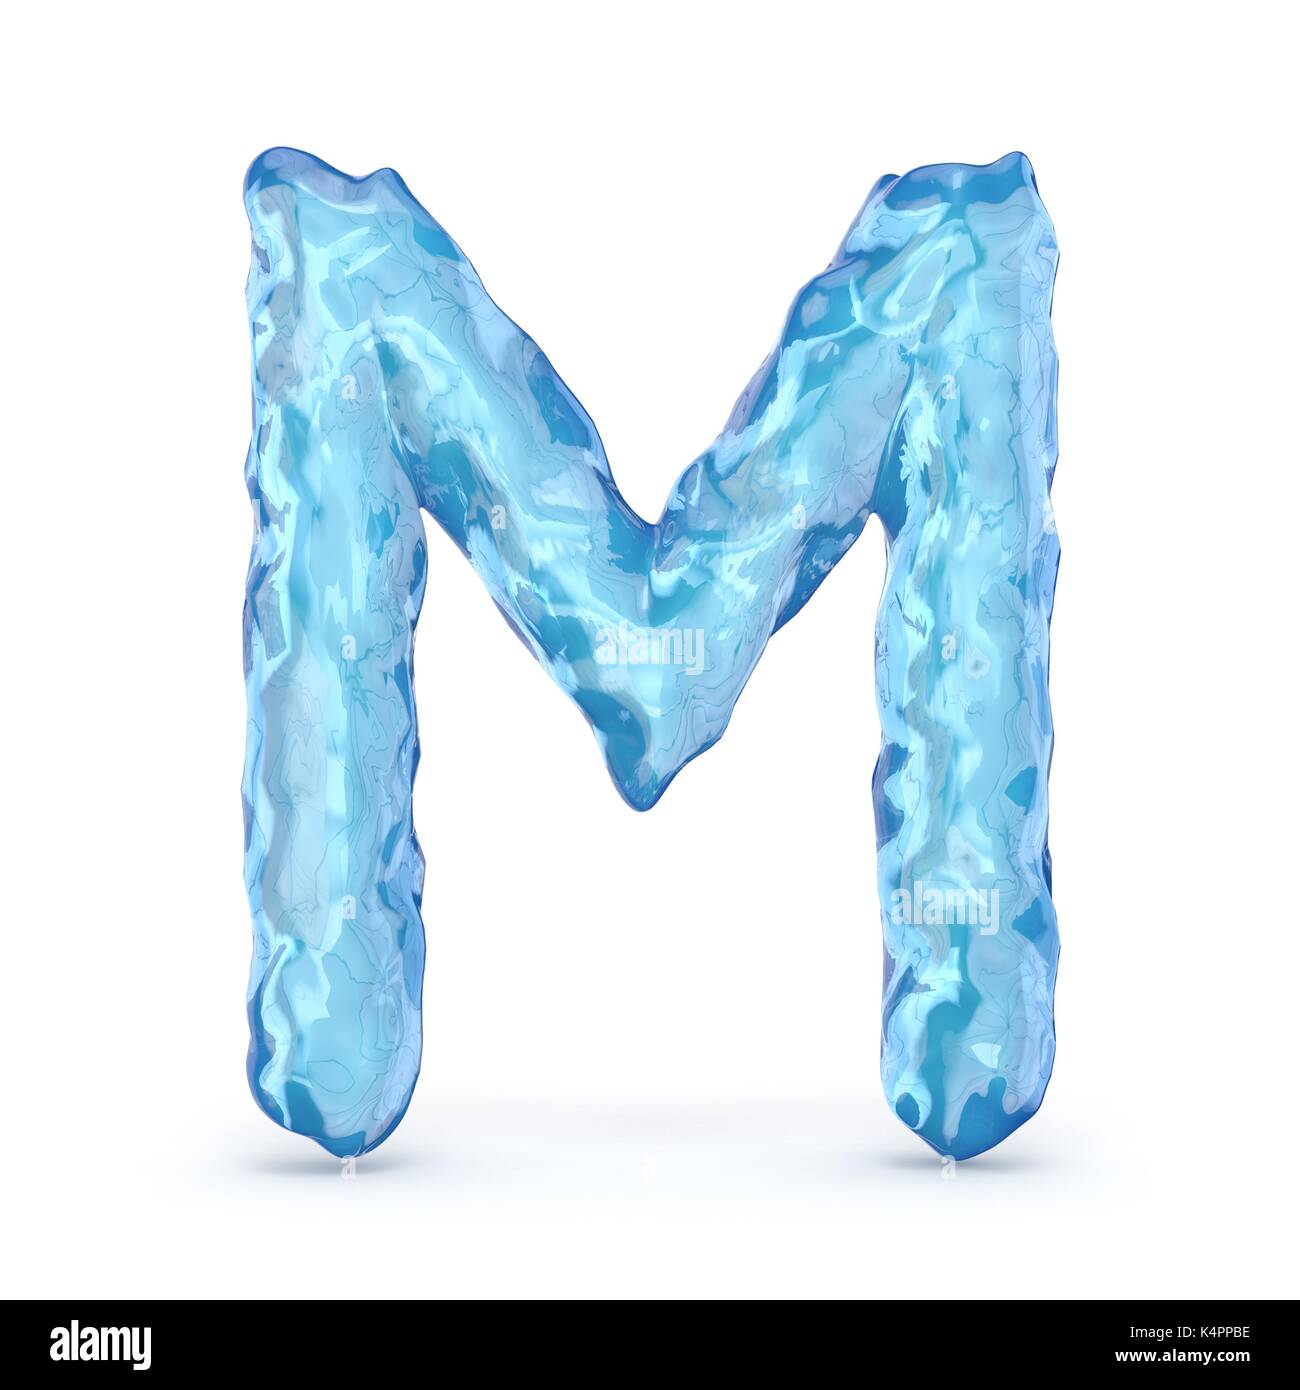 Ice font letter M 3D render illustration isolated on white background Stock Photo